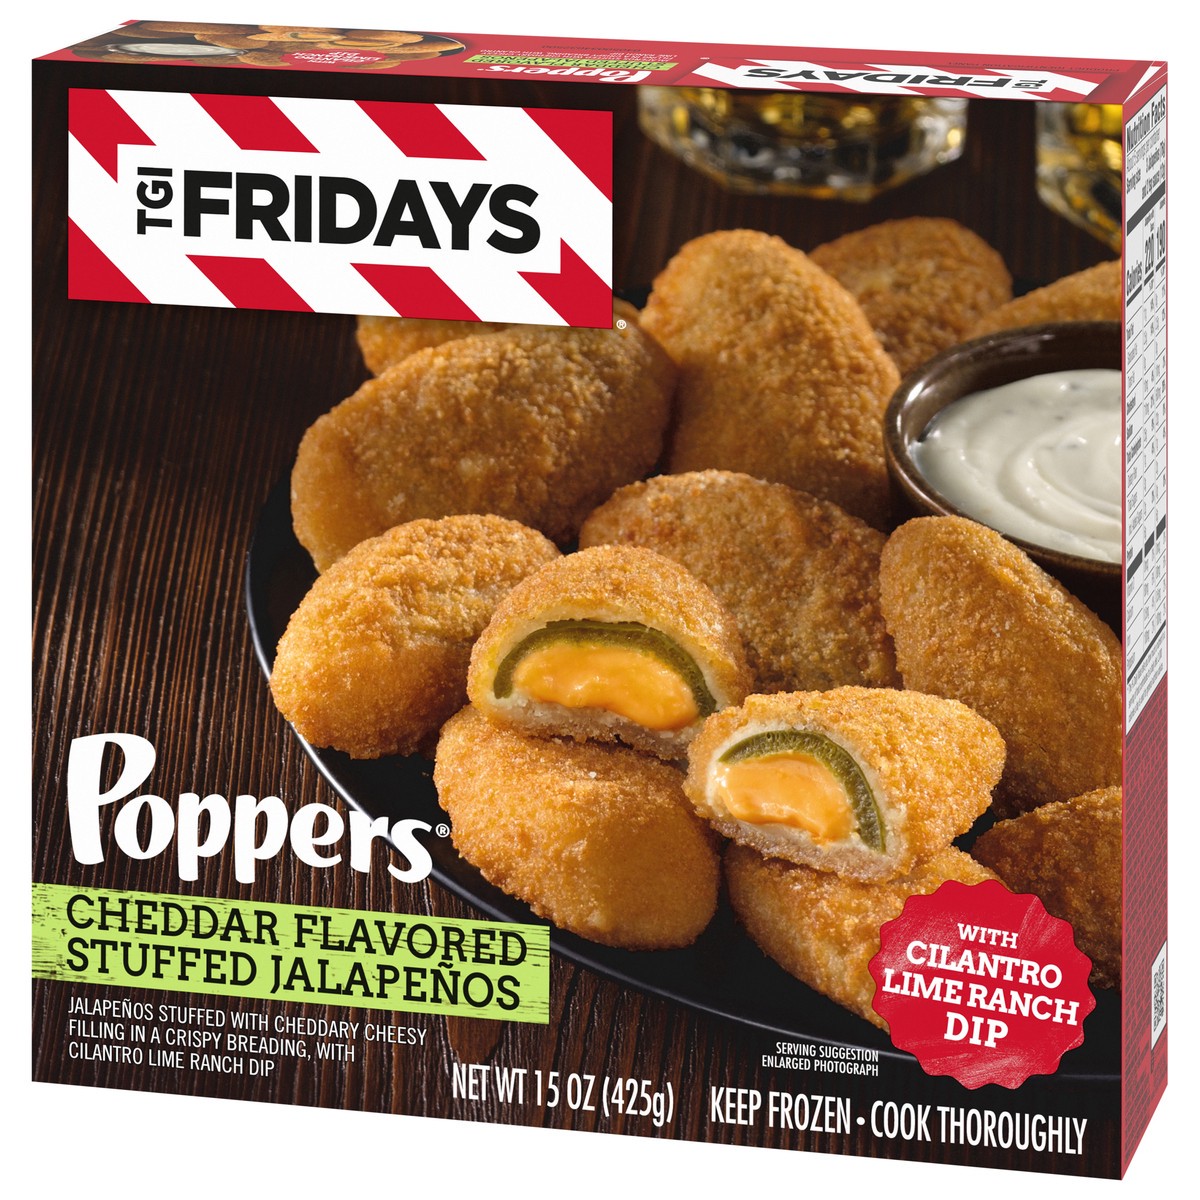 slide 7 of 9, T.G.I. Fridays TGI Fridays Frozen Appetizers Cheddar Cheese Stuffed Jalapeno Poppers with Cilantro Lime Ranch Dip, 15 oz. Box, 15 oz